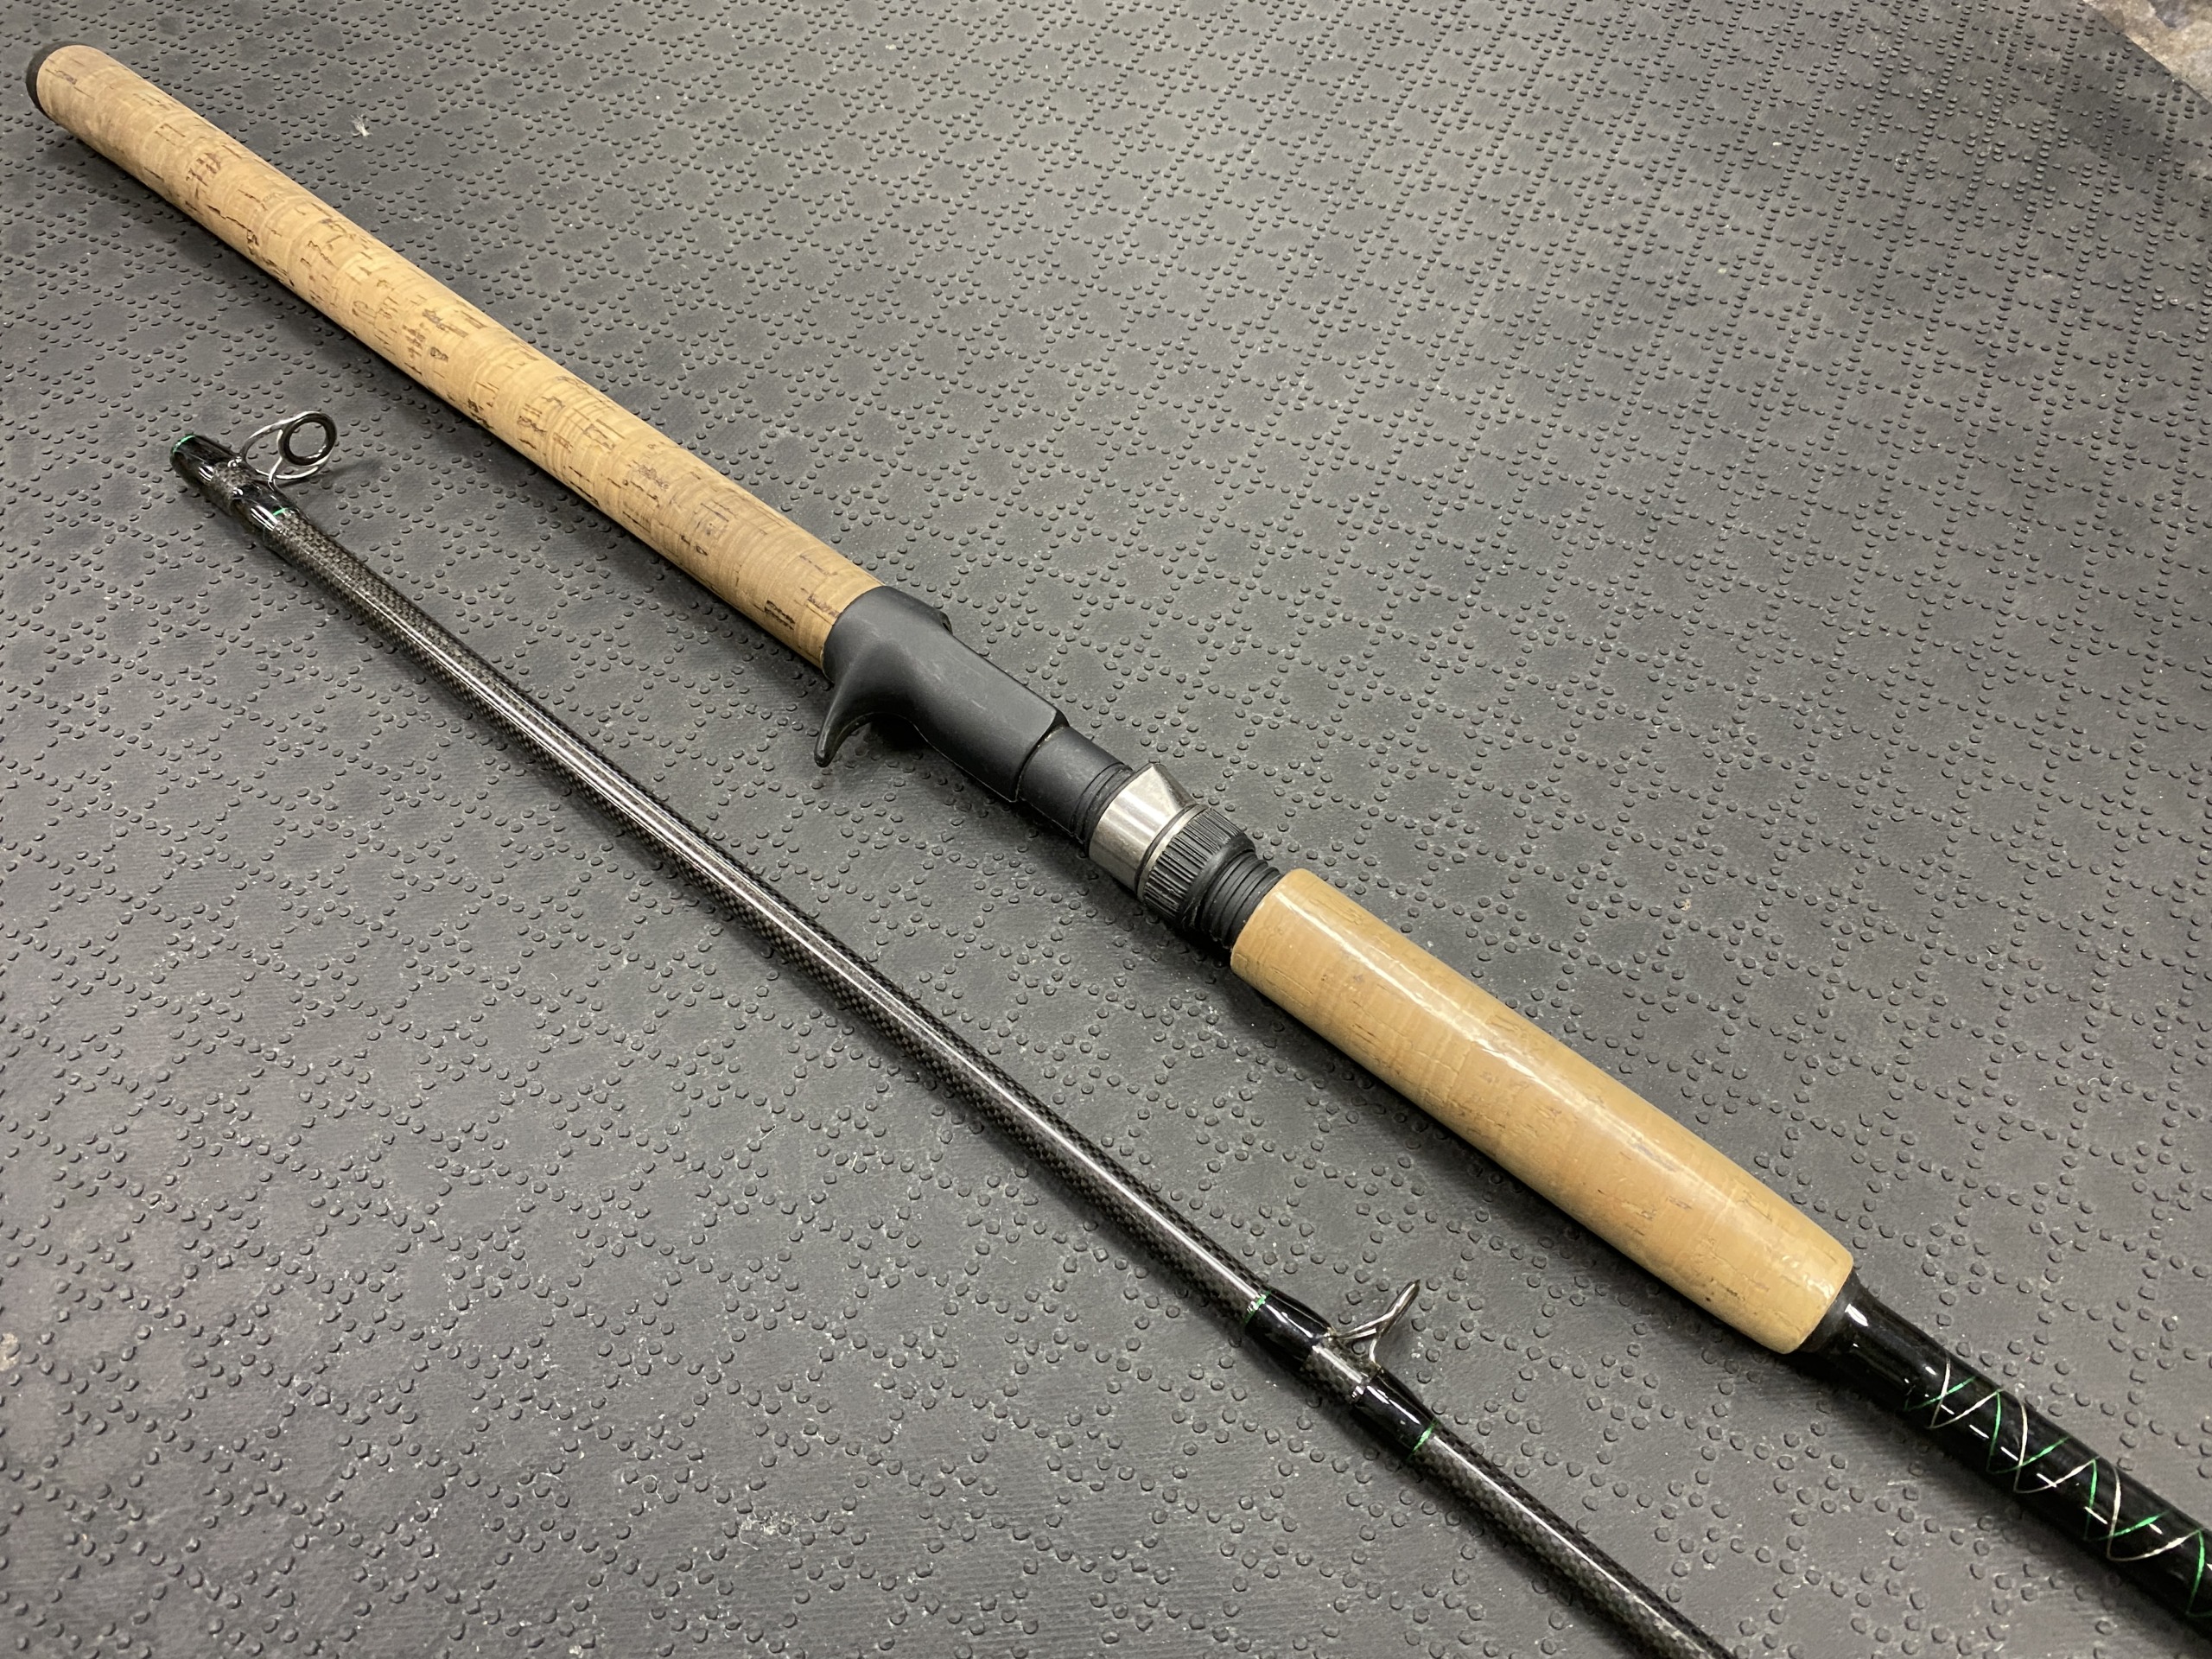 https://thefirstcast.ca/wp-content/uploads/2022/07/Bear-Claw-XGR-BC688C-9Foot-9Inch-2Piece-Bait-Casting-Rod-B-scaled.jpg